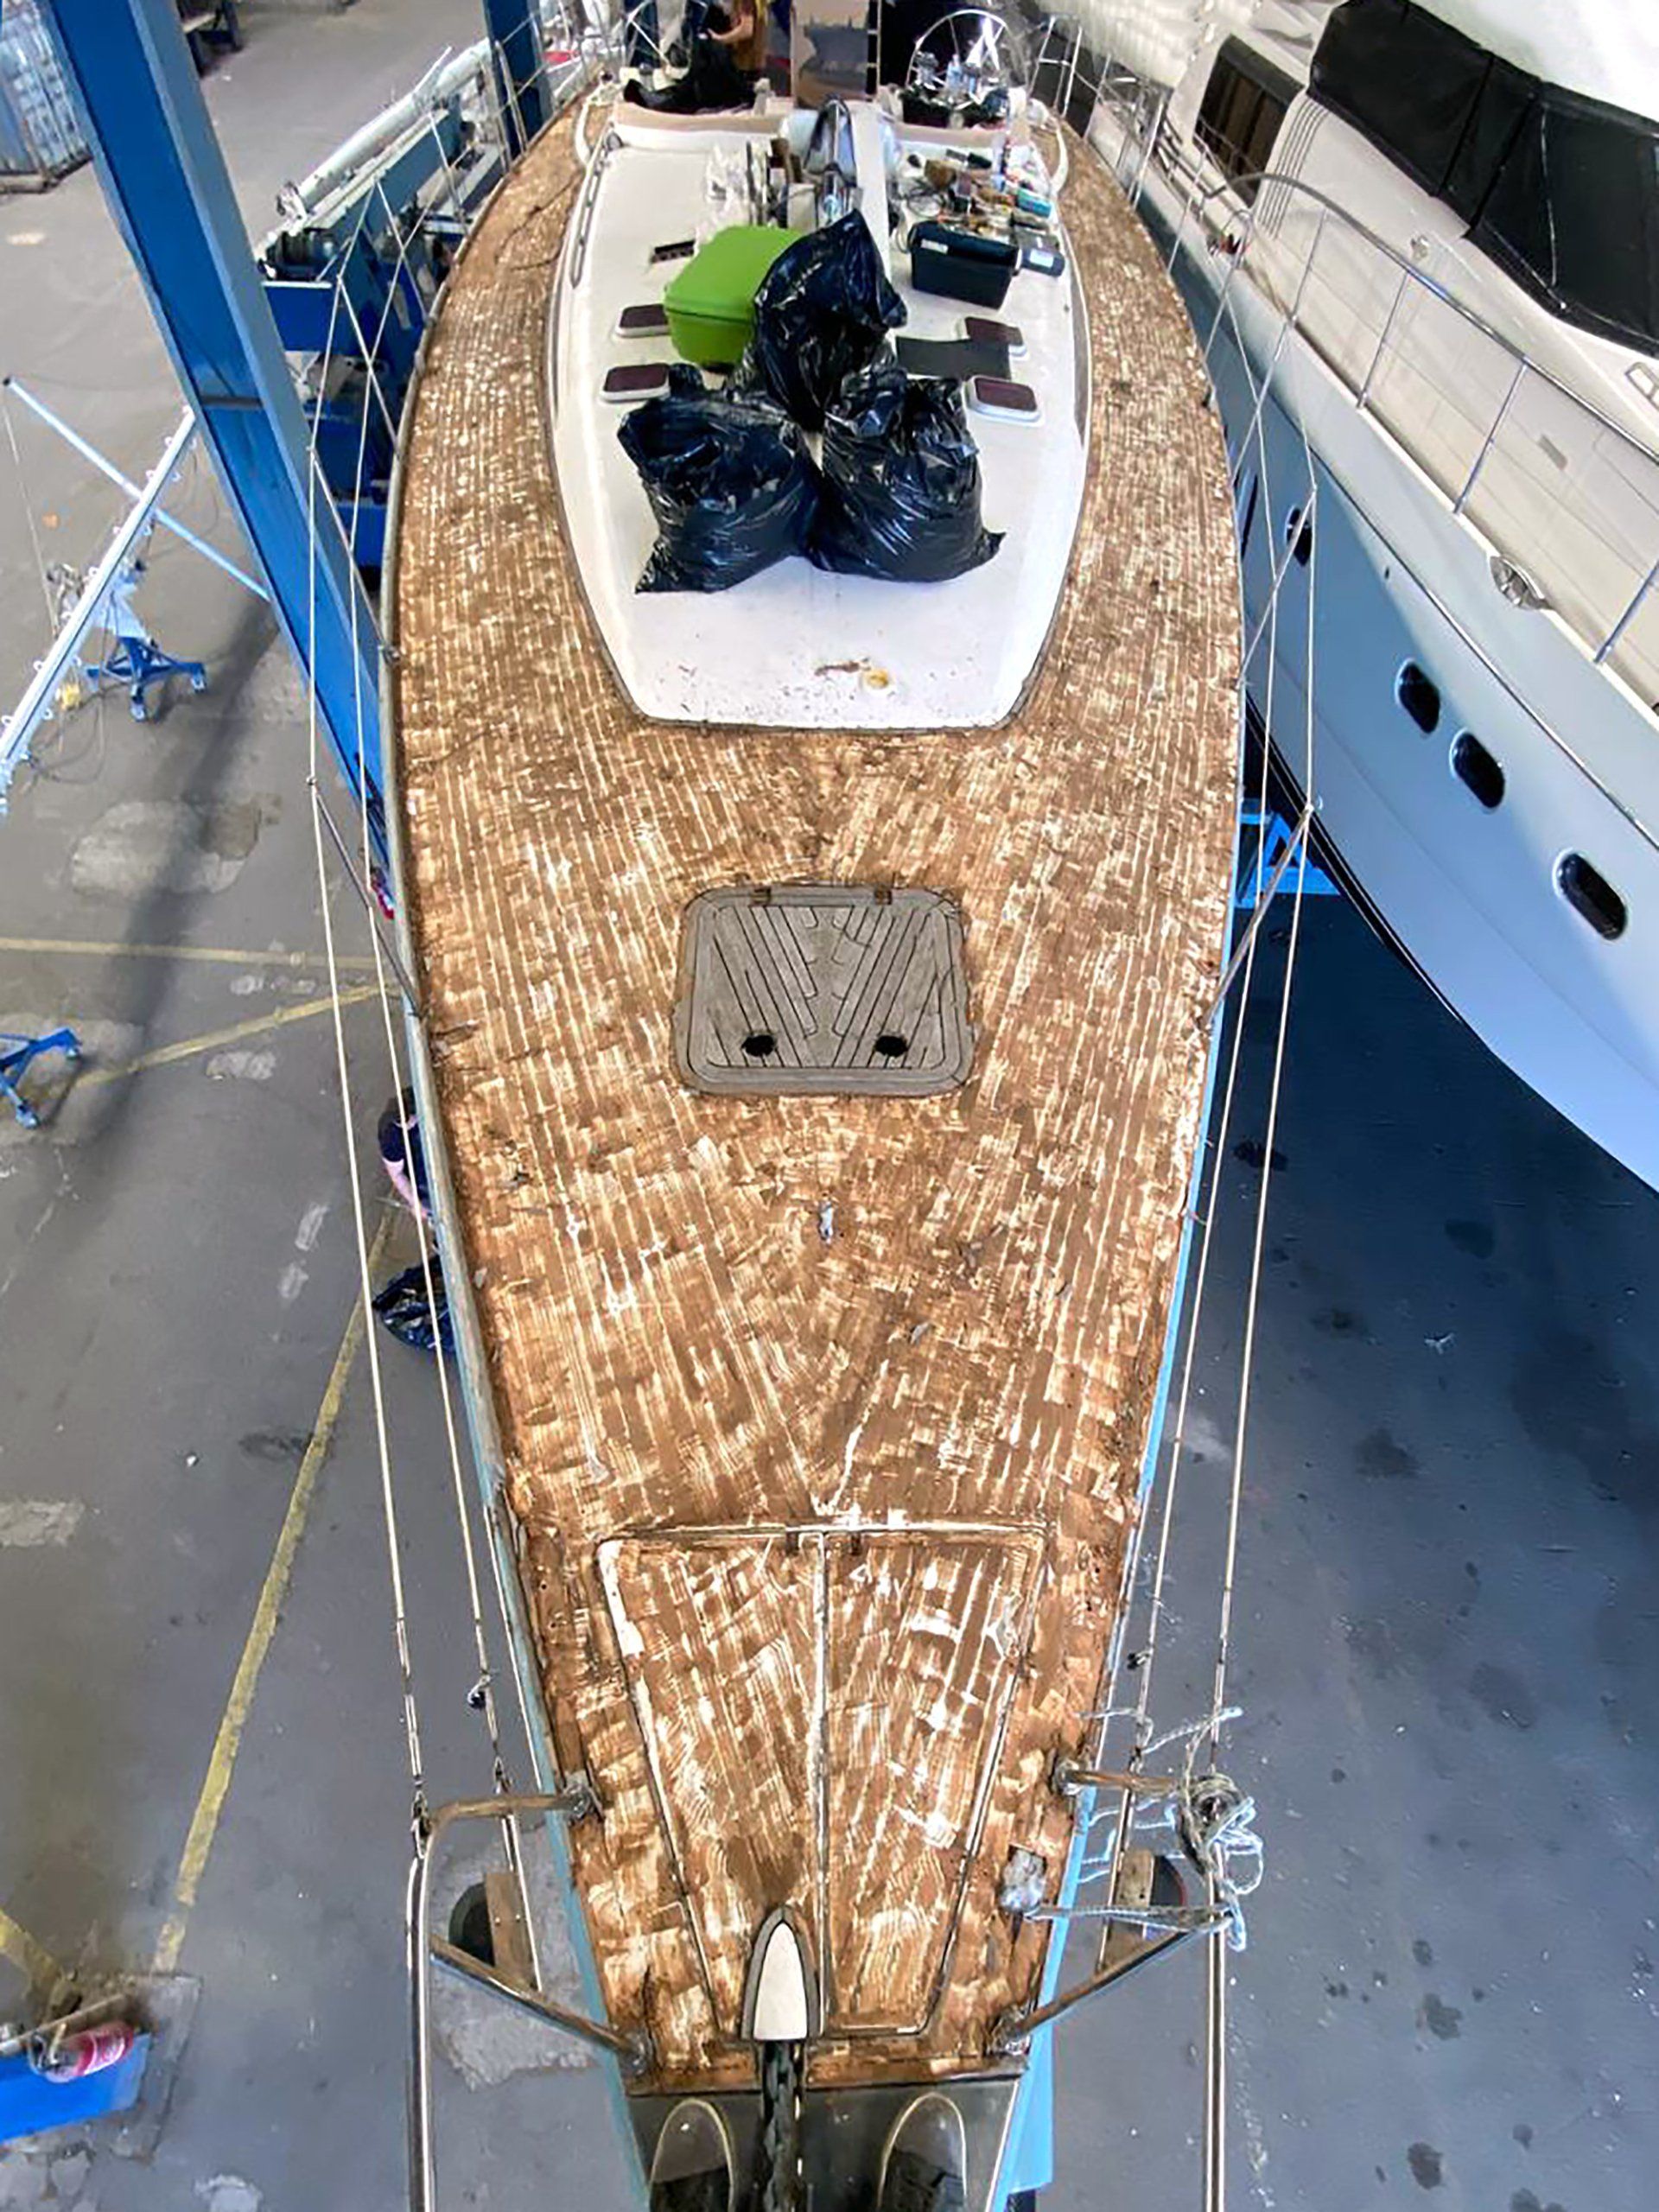 Removal of an old teak deck on a Futuna 57 sailing yacht as preparation for a new teak deck installation by Mobilerbootsbau teak decking company